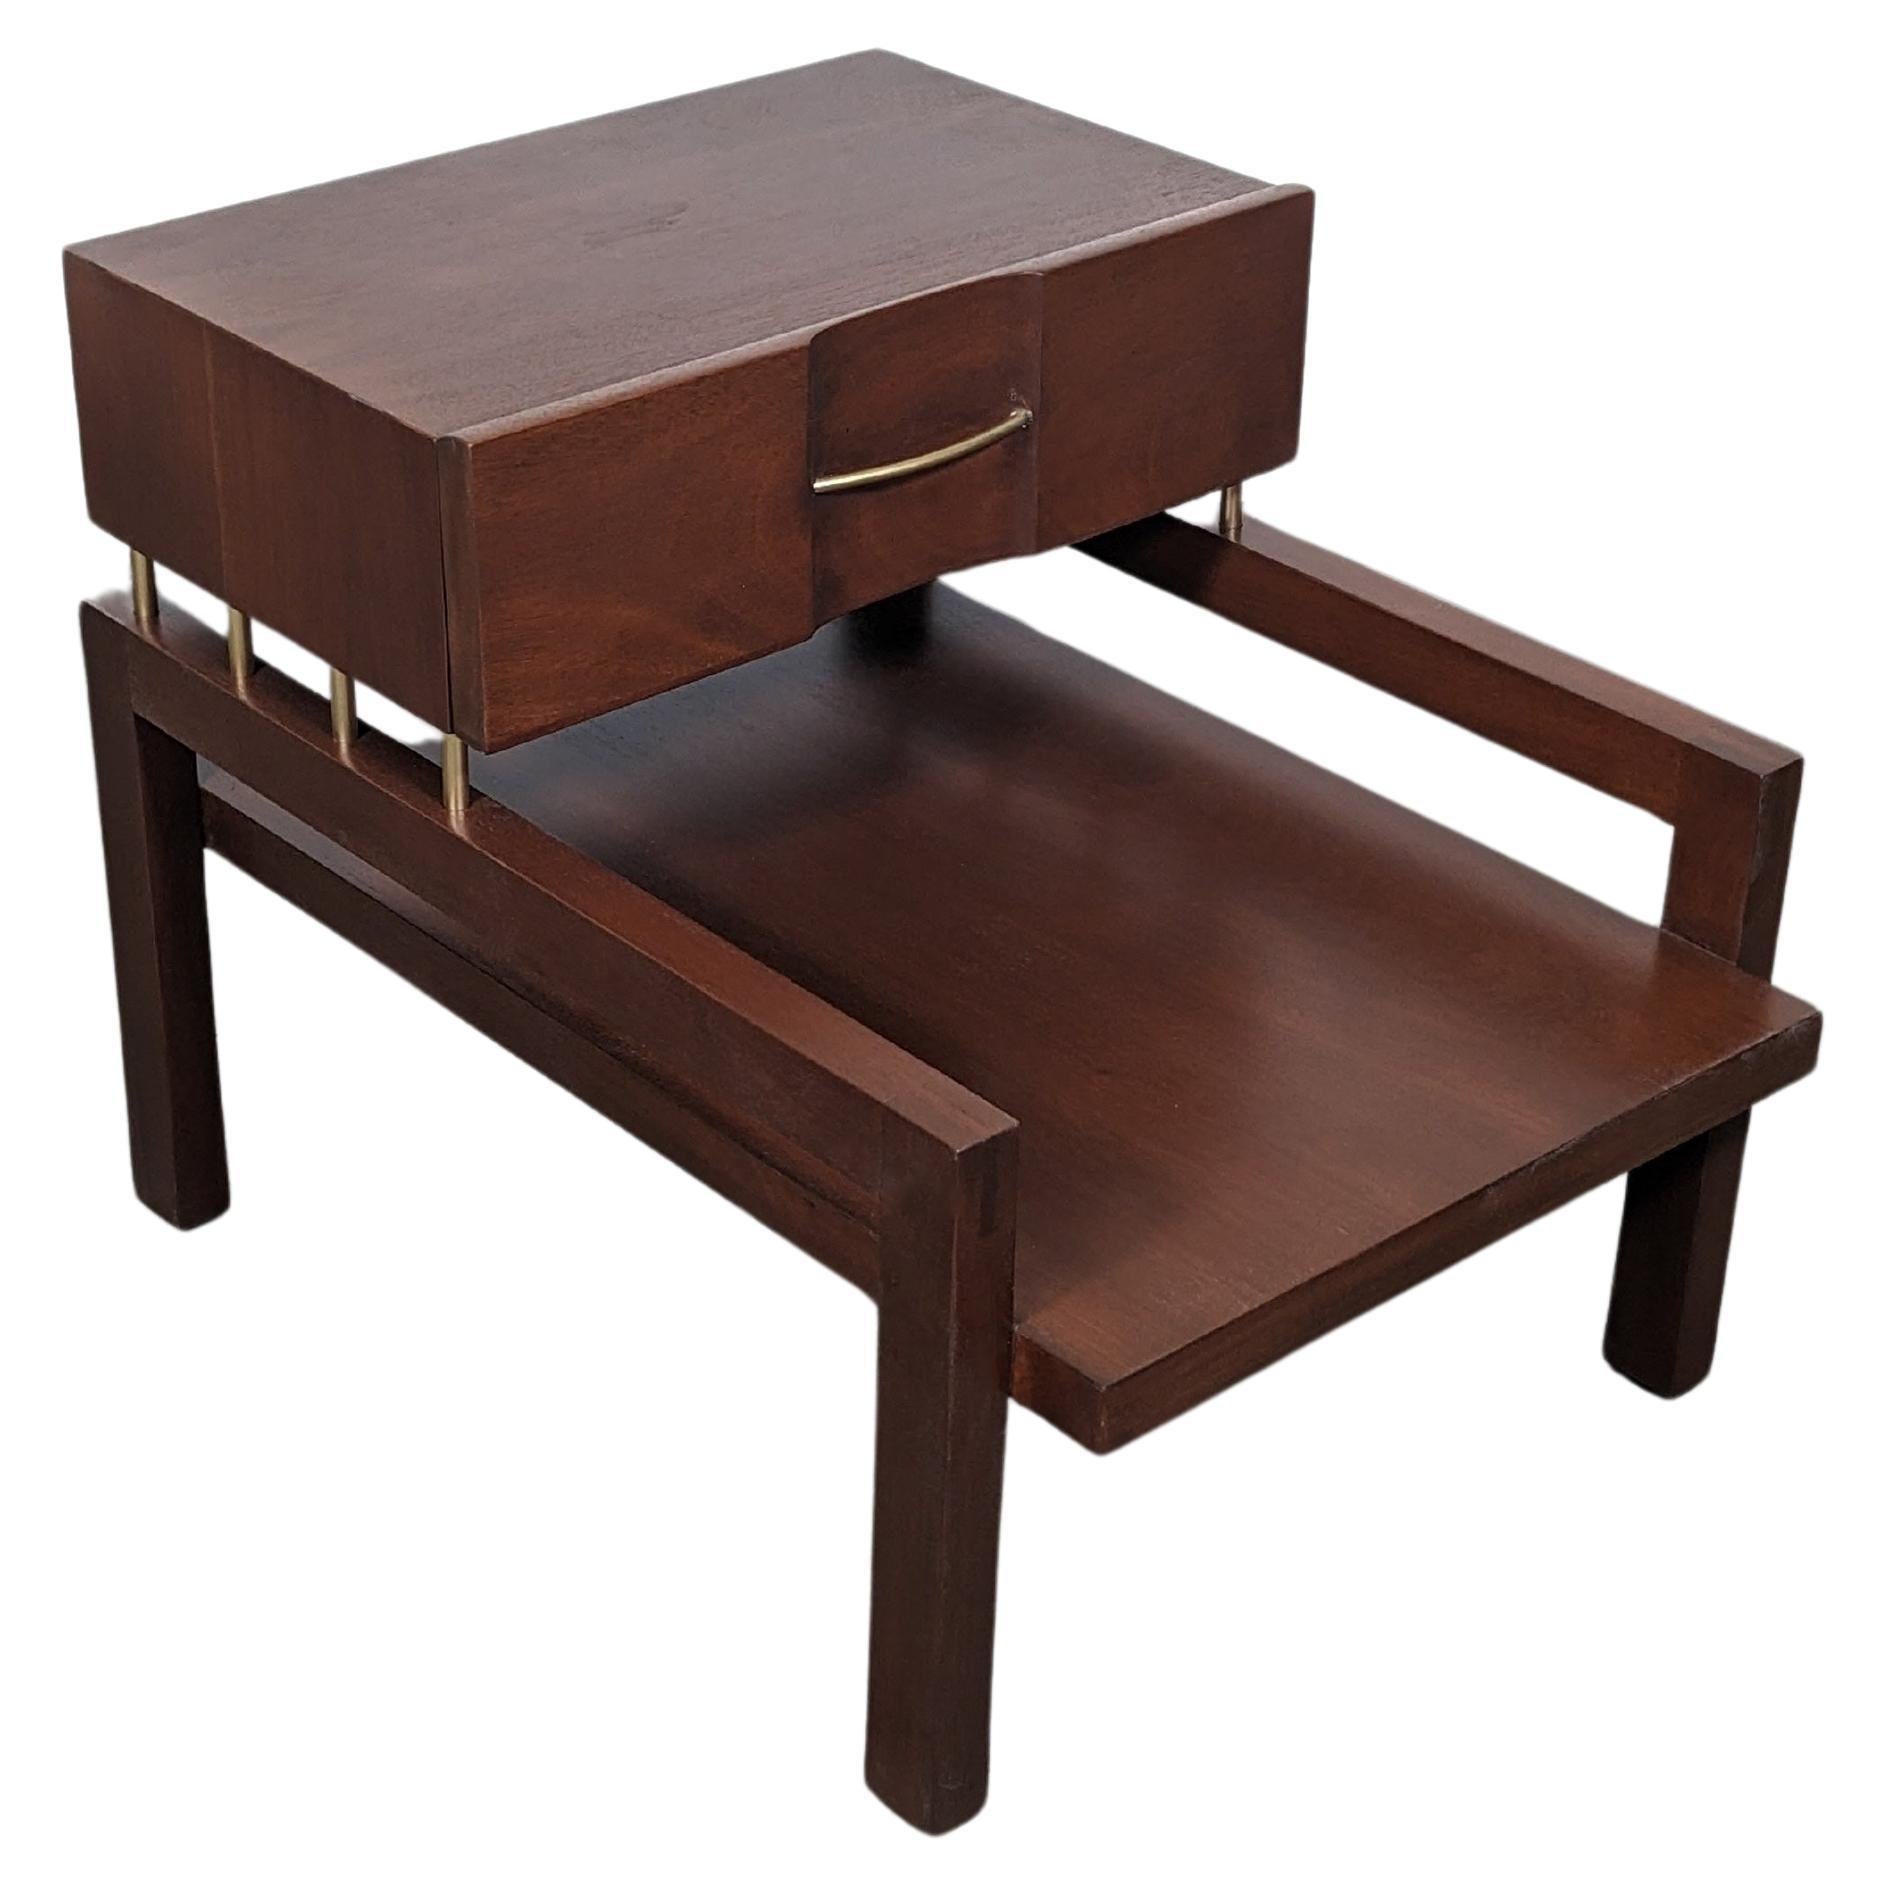 Mid Century Modern End Table by Edmond J. Spence for Industria Mueblera, c1950s For Sale